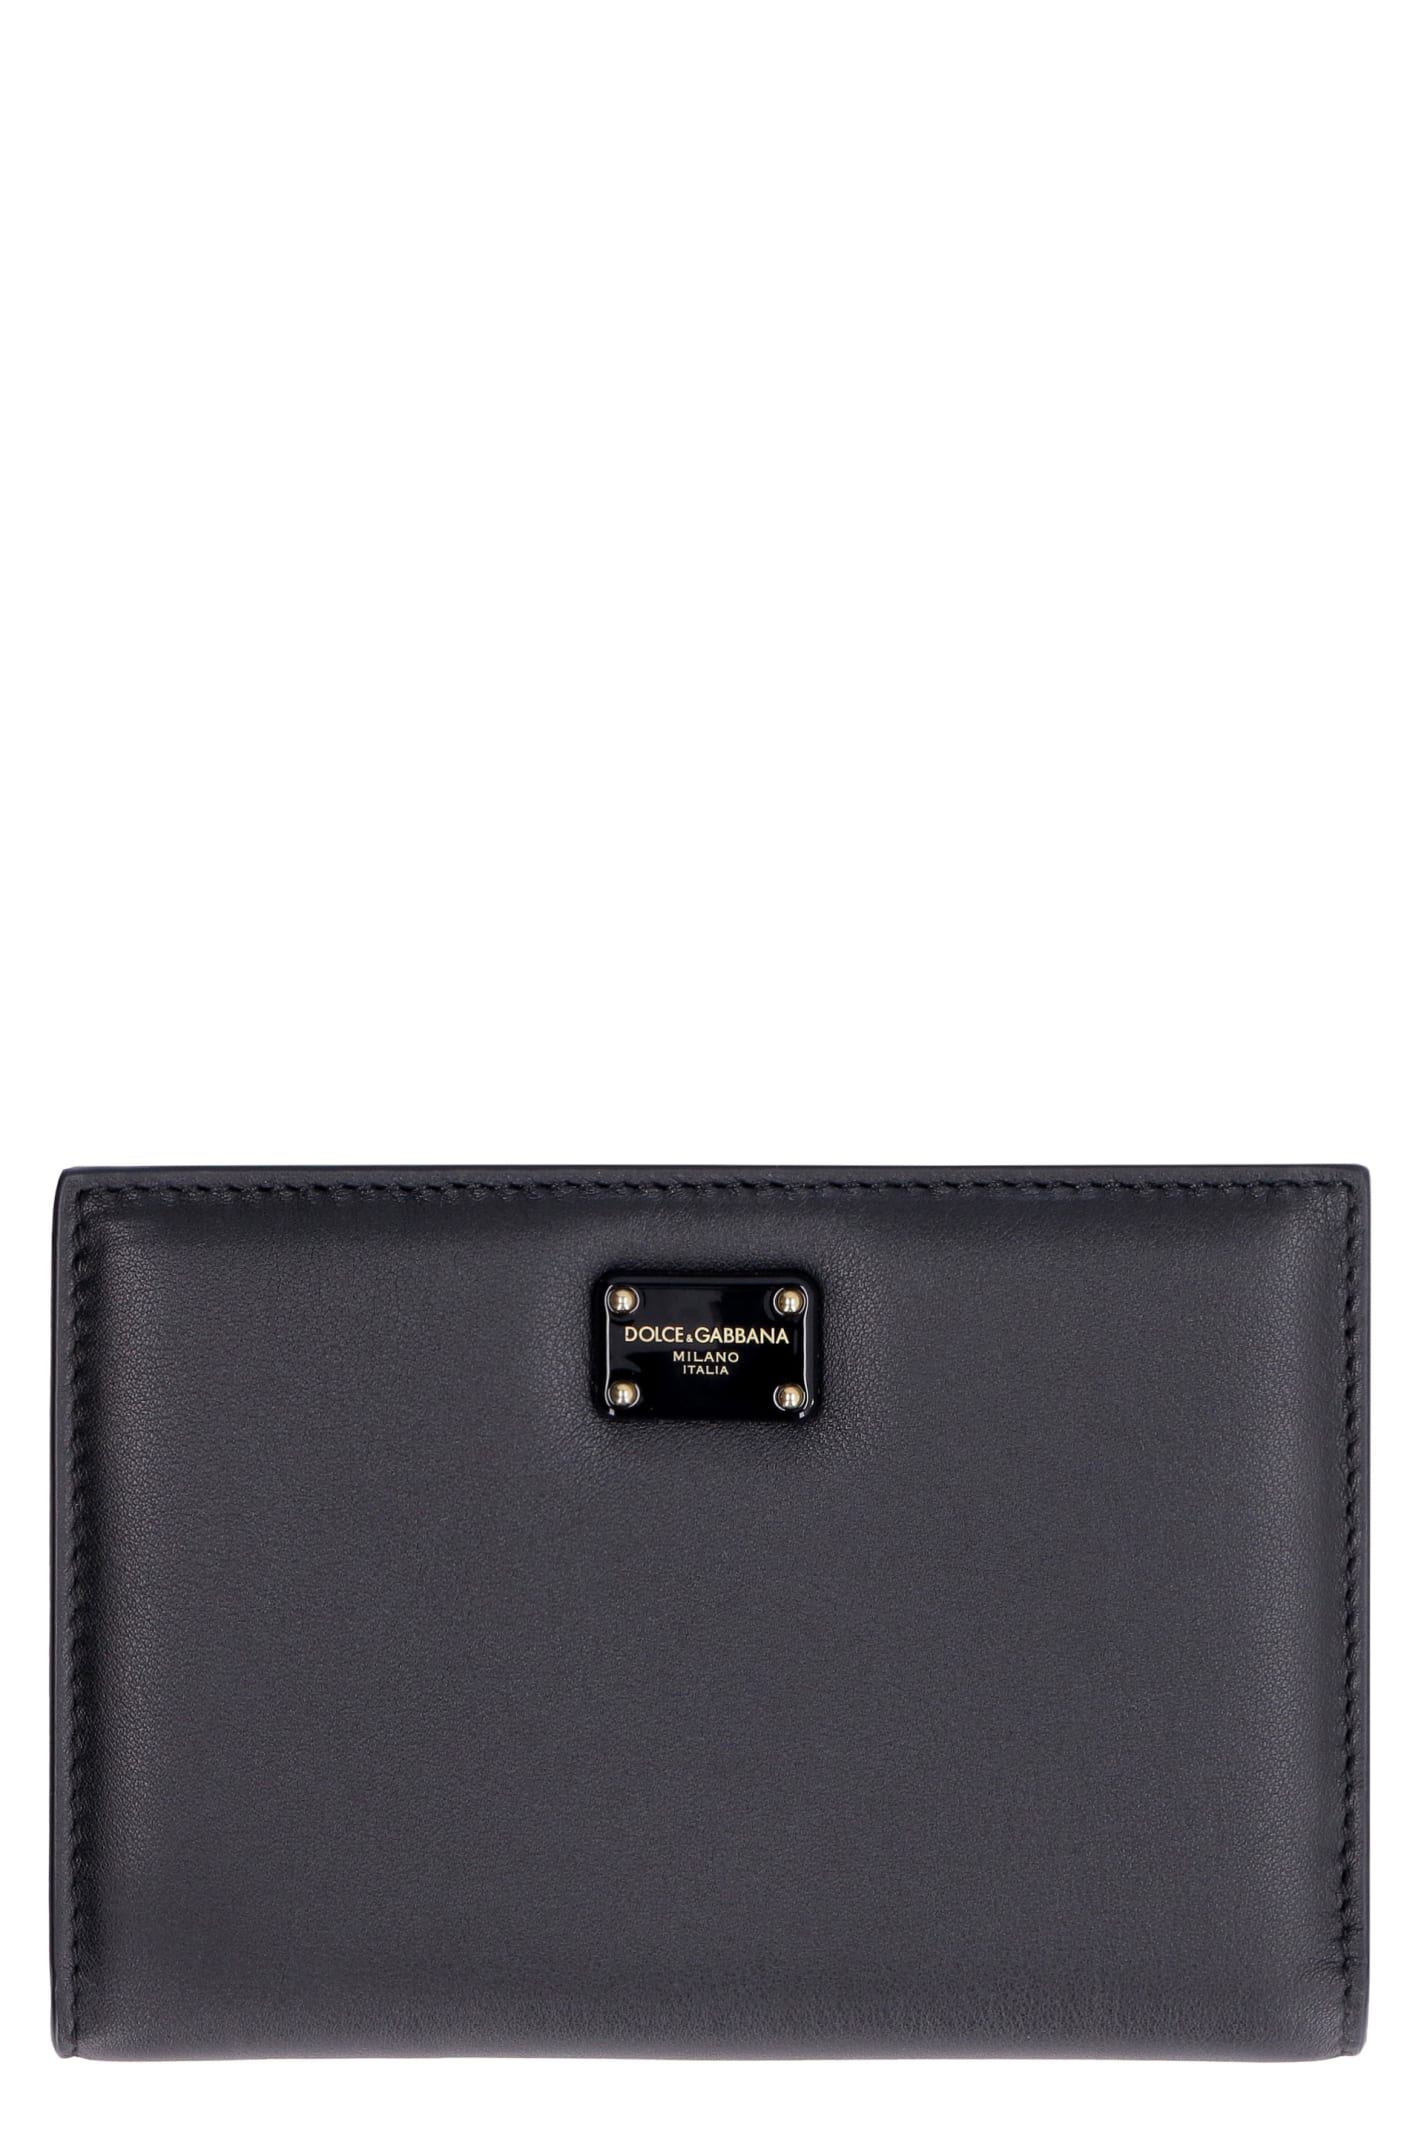 Dolce & Gabbana Small Leather Flap-over Wallet